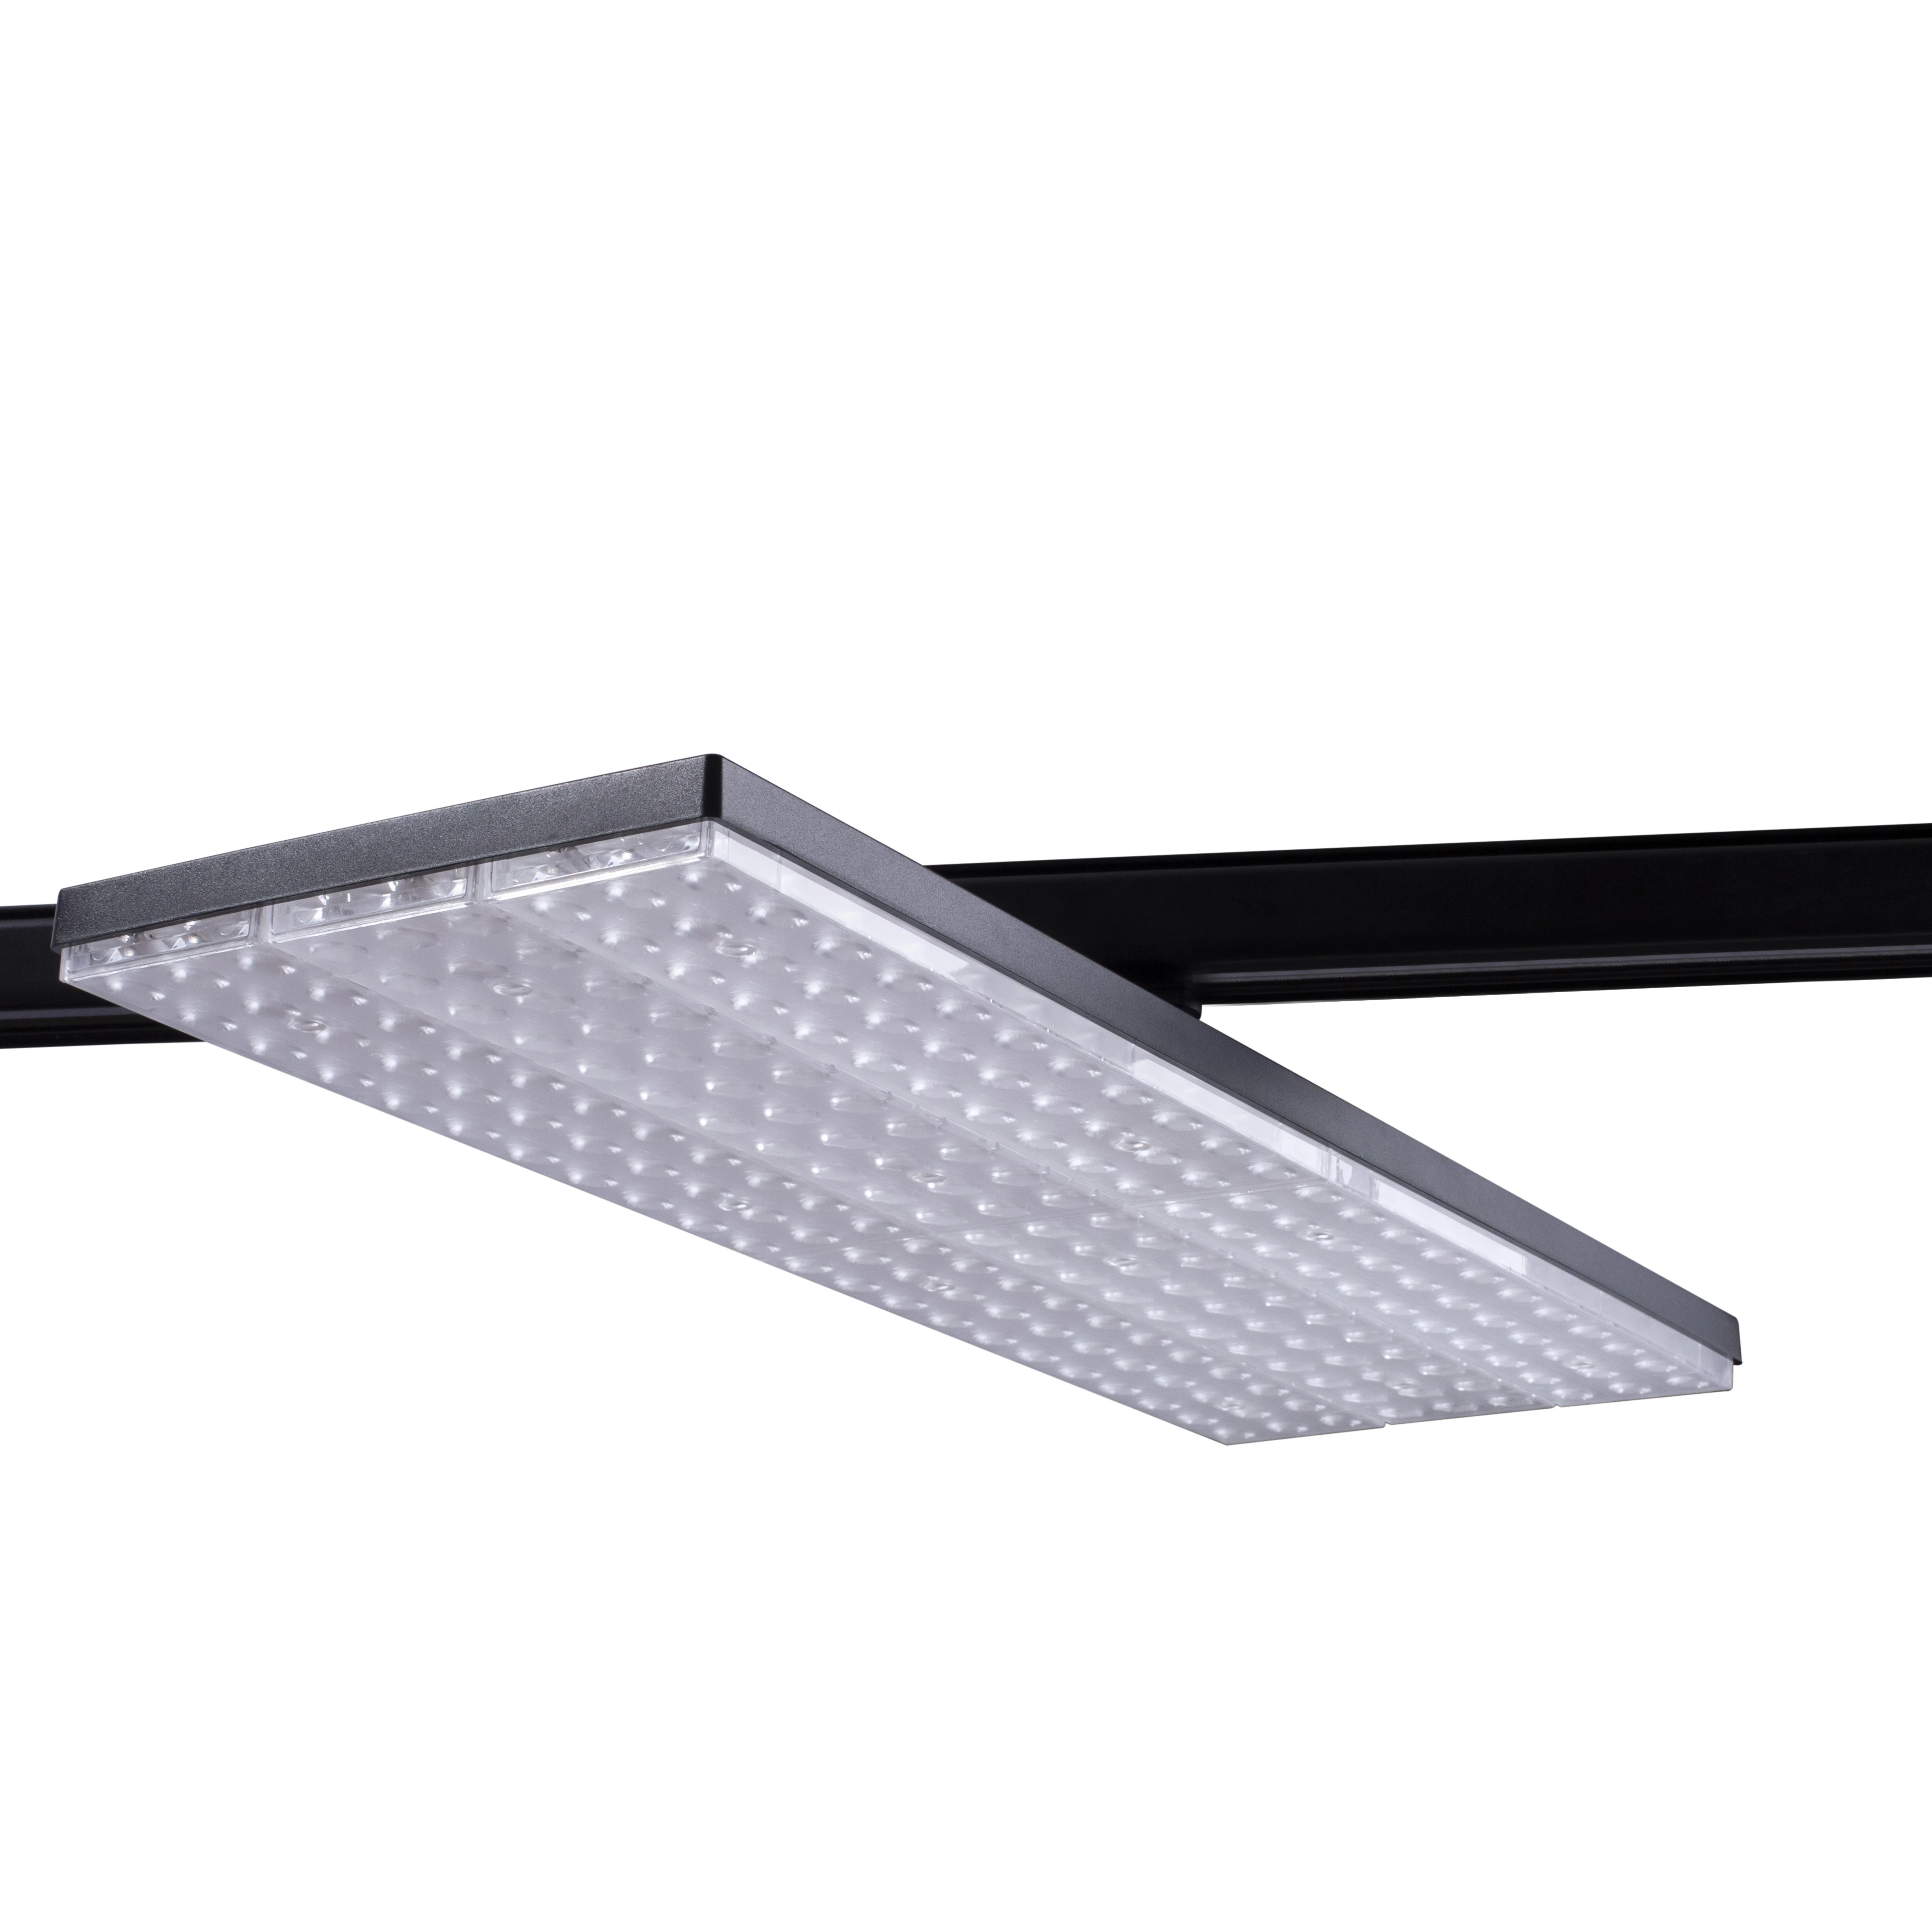 TRIECO Retail Commercial  lighting solution 160lm/w  led track light